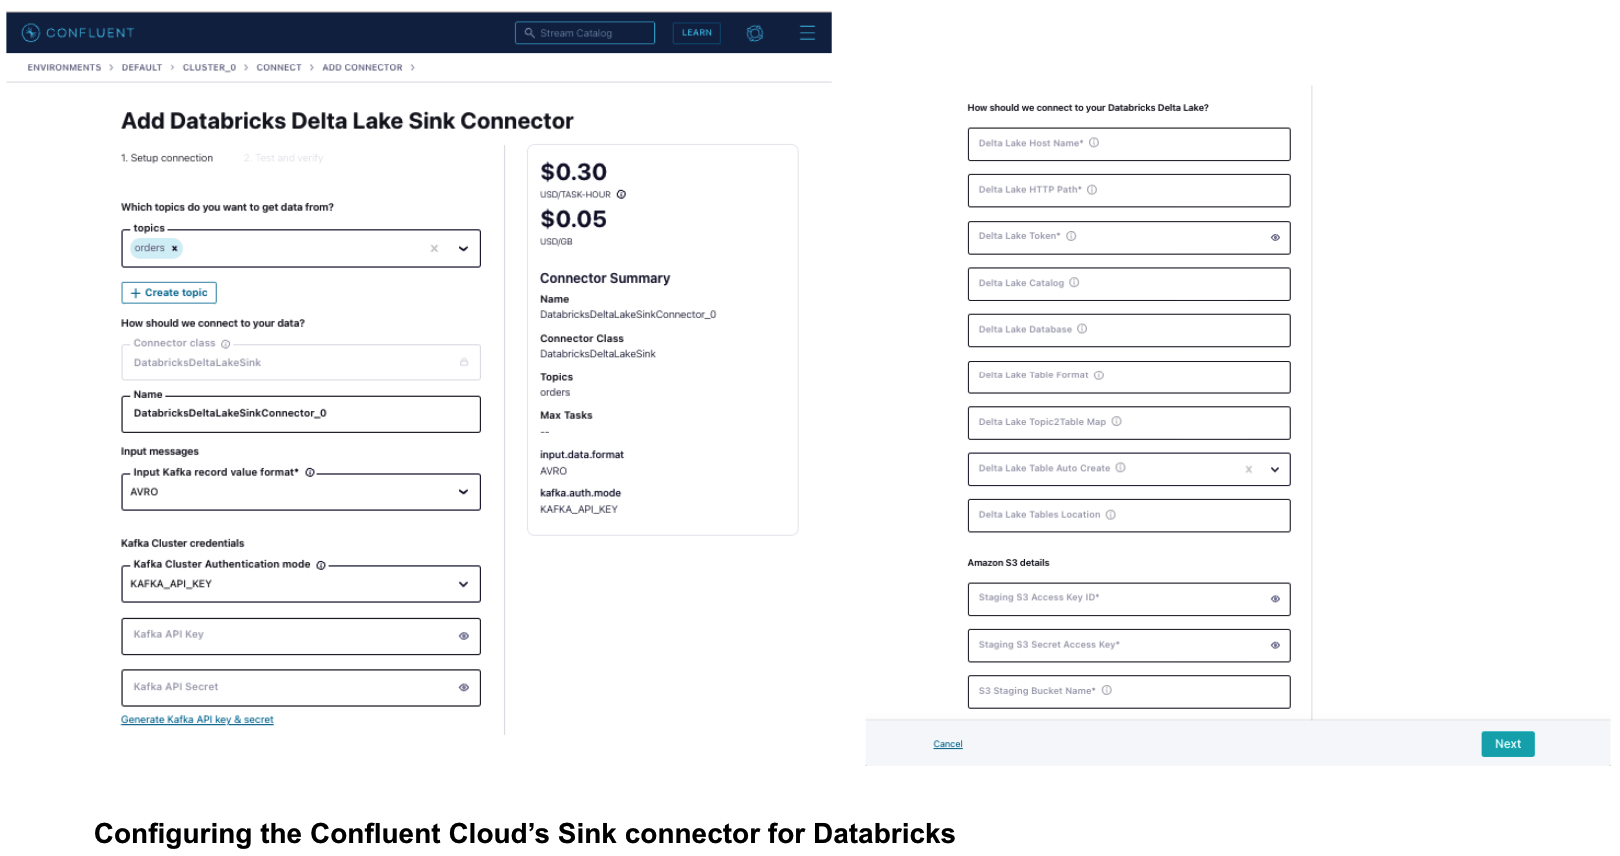 Configuring the Confluent Cloud’s Sink connector for Databricks.